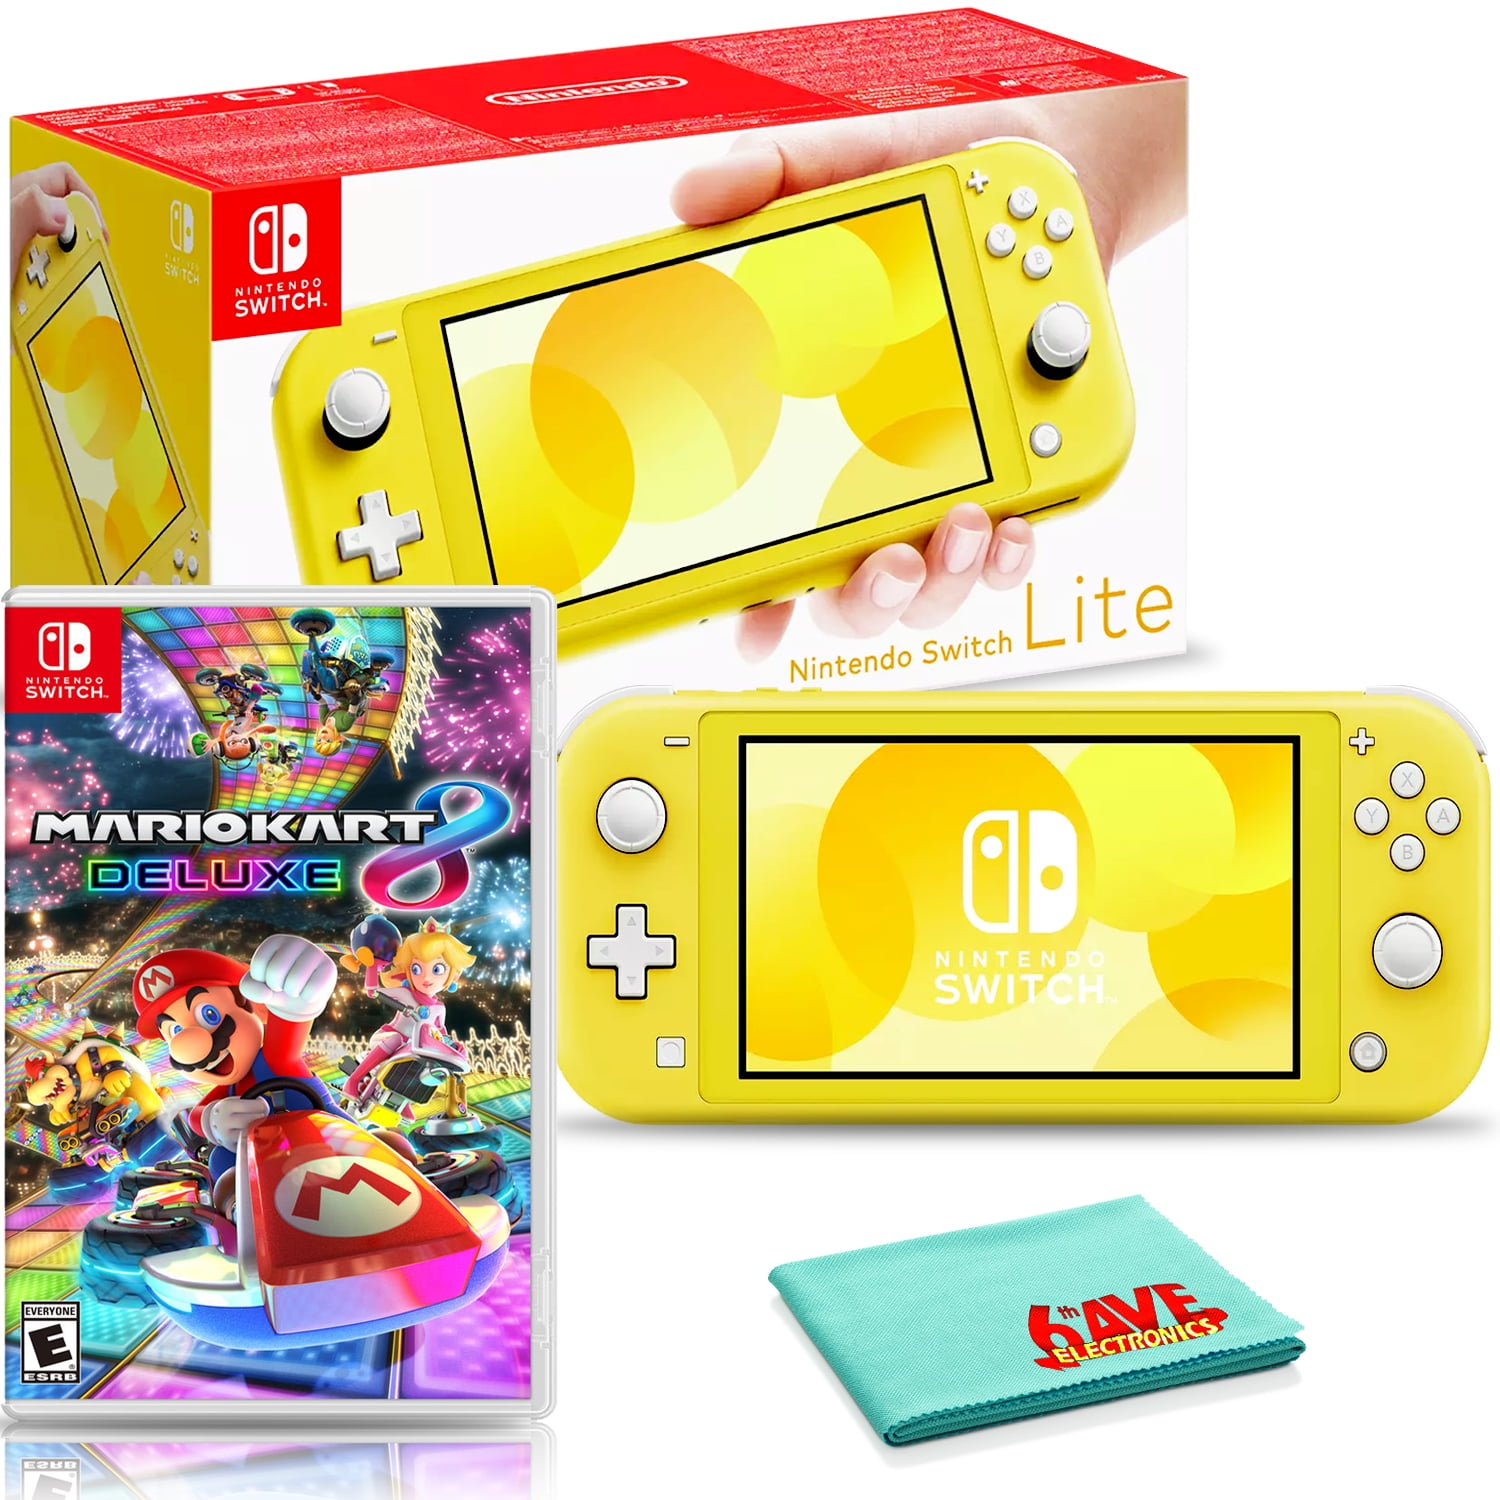 Nintendo Switch Lite (Yellow) Bundle with Mario Kart and Cleaning Cloth